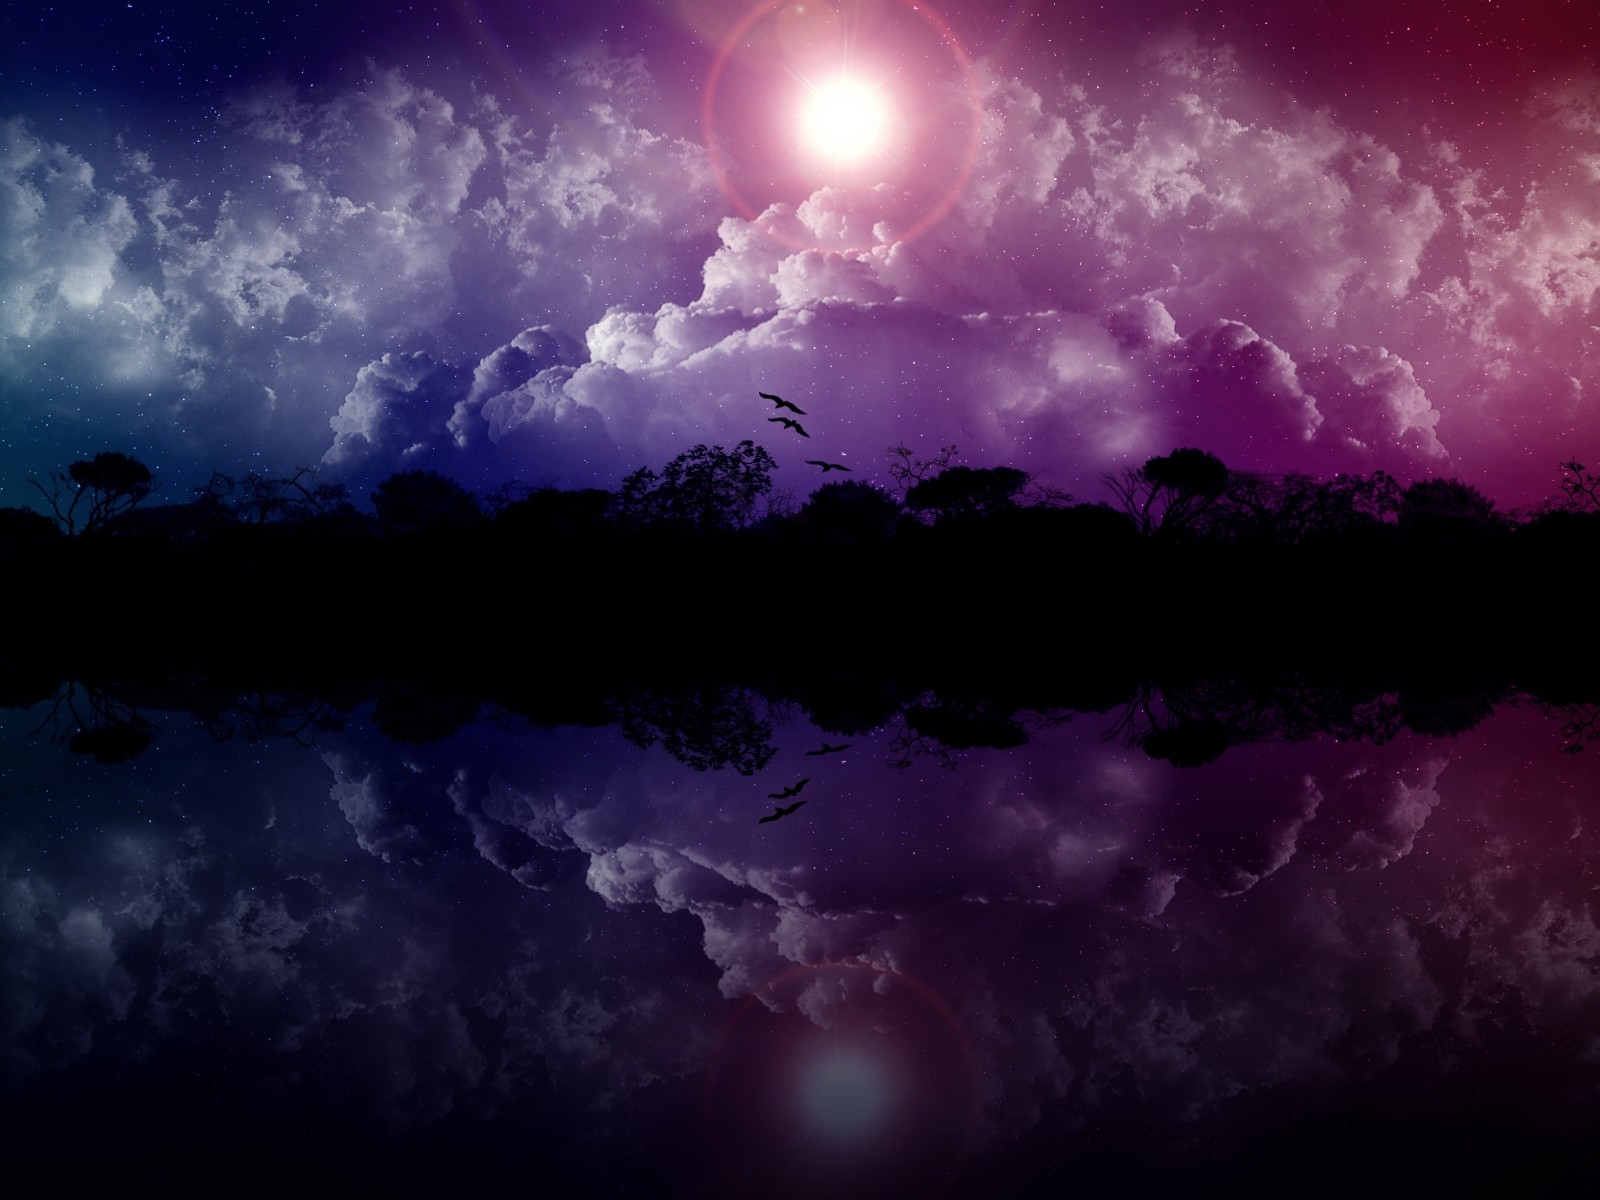 clouds, Landscapes, Trees, Stars, Birds, Falling, Down, Skyscapes, Reflections, Photo, Manipulation Wallpaper